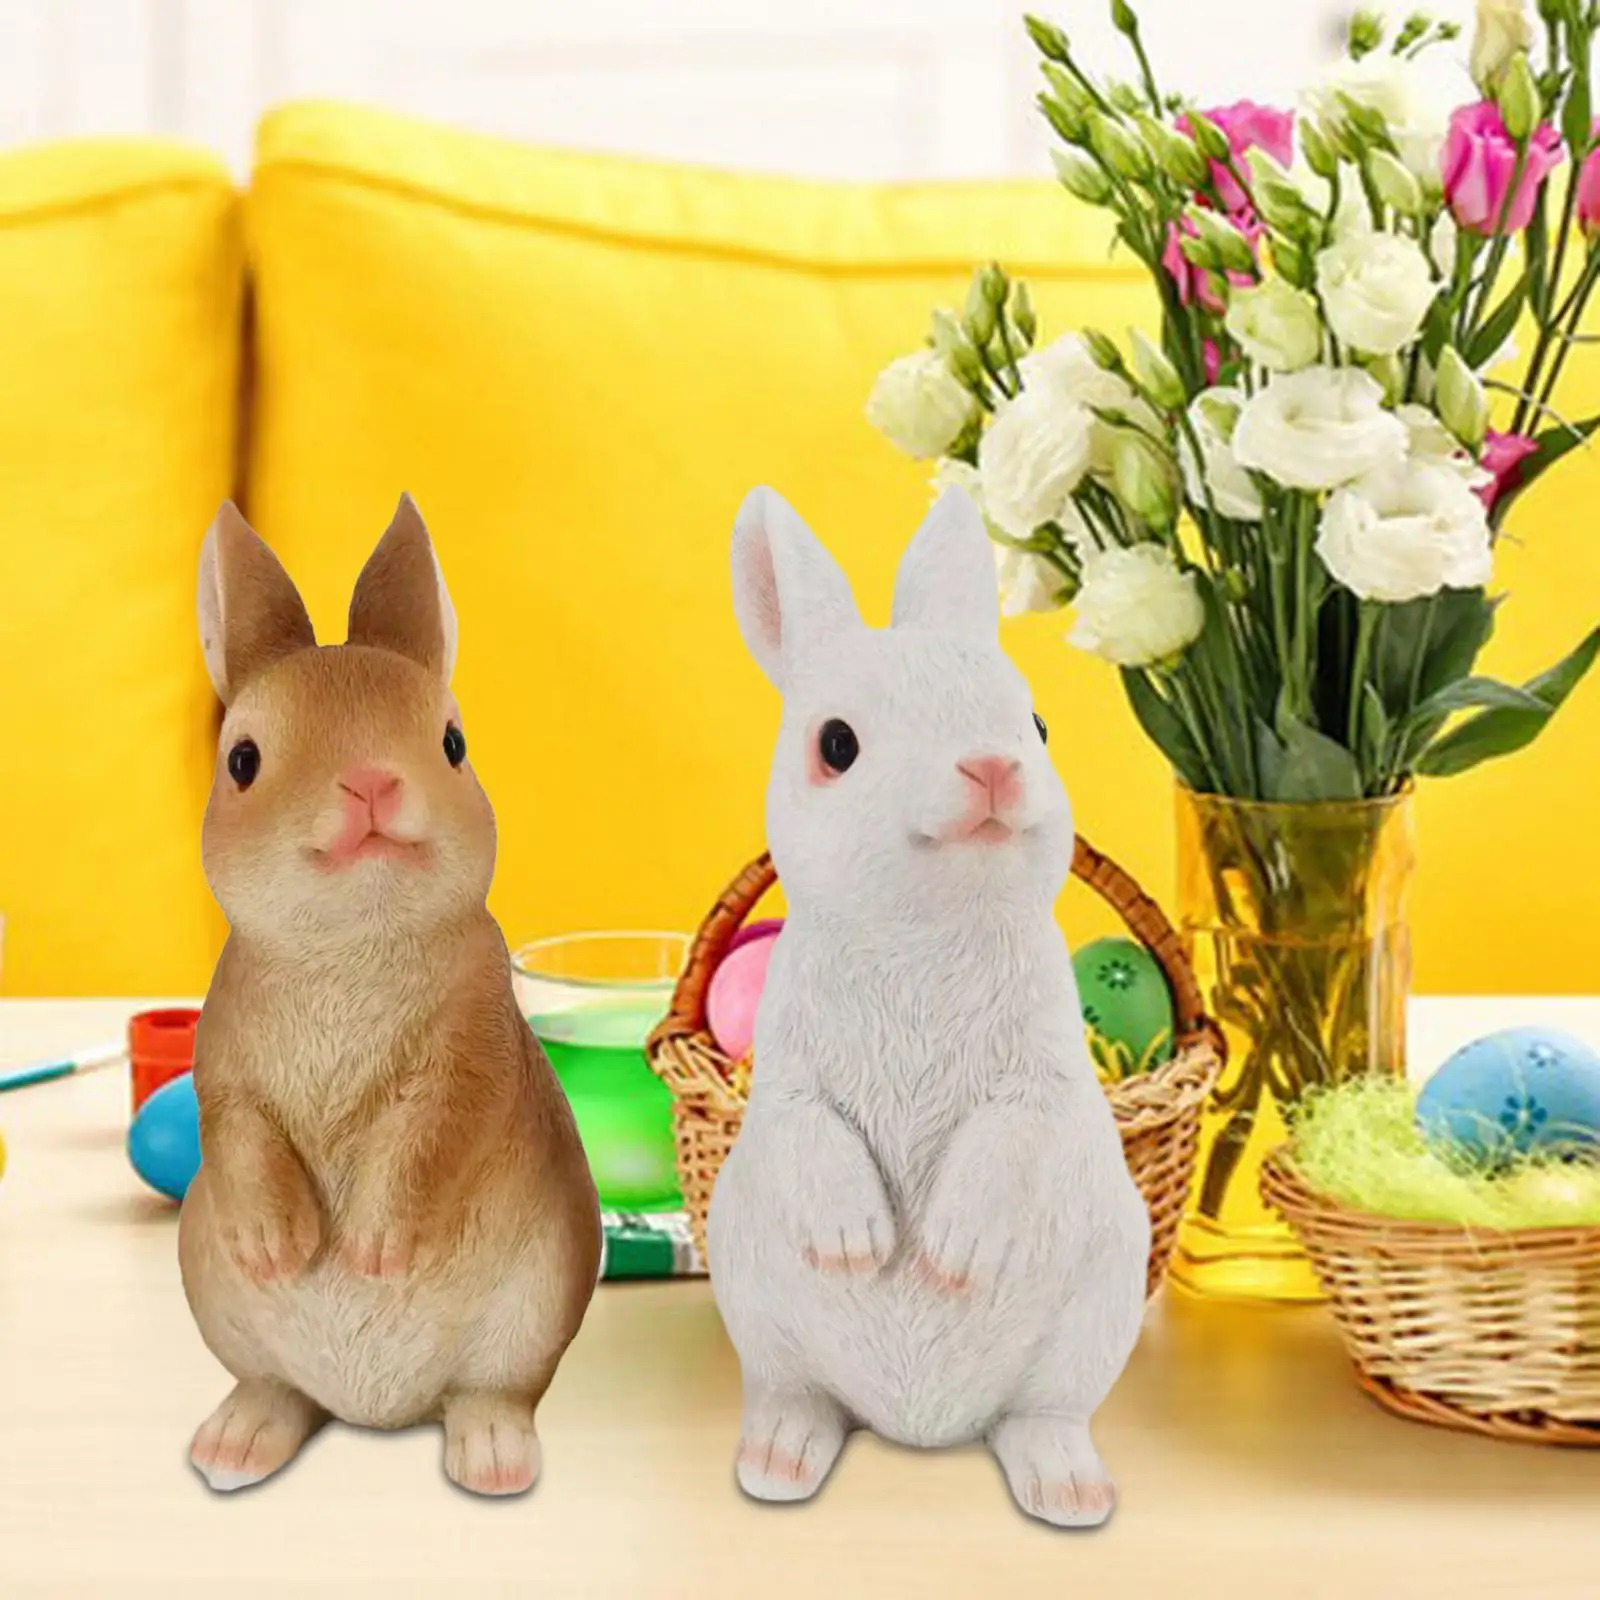 

2Pcs Bunny Figurines Easter Decorations Rabbit Small Sculptures Resin Animal Statues for Courtyard Bedroom Lawn Home Balcony